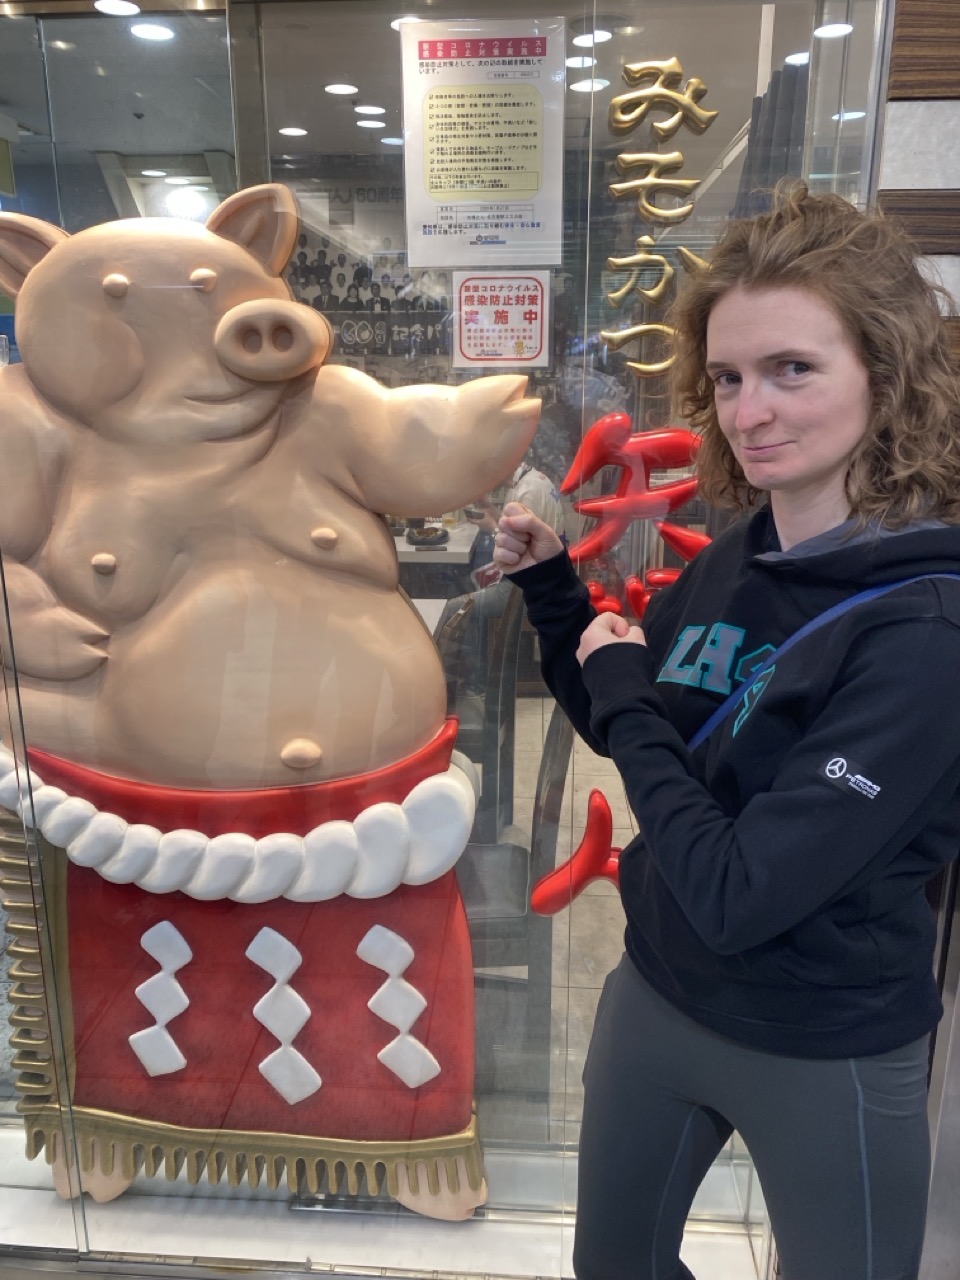 Lucy fighting with the pig man. This is the mascot for the miso katsu chain we went to, Yabaton